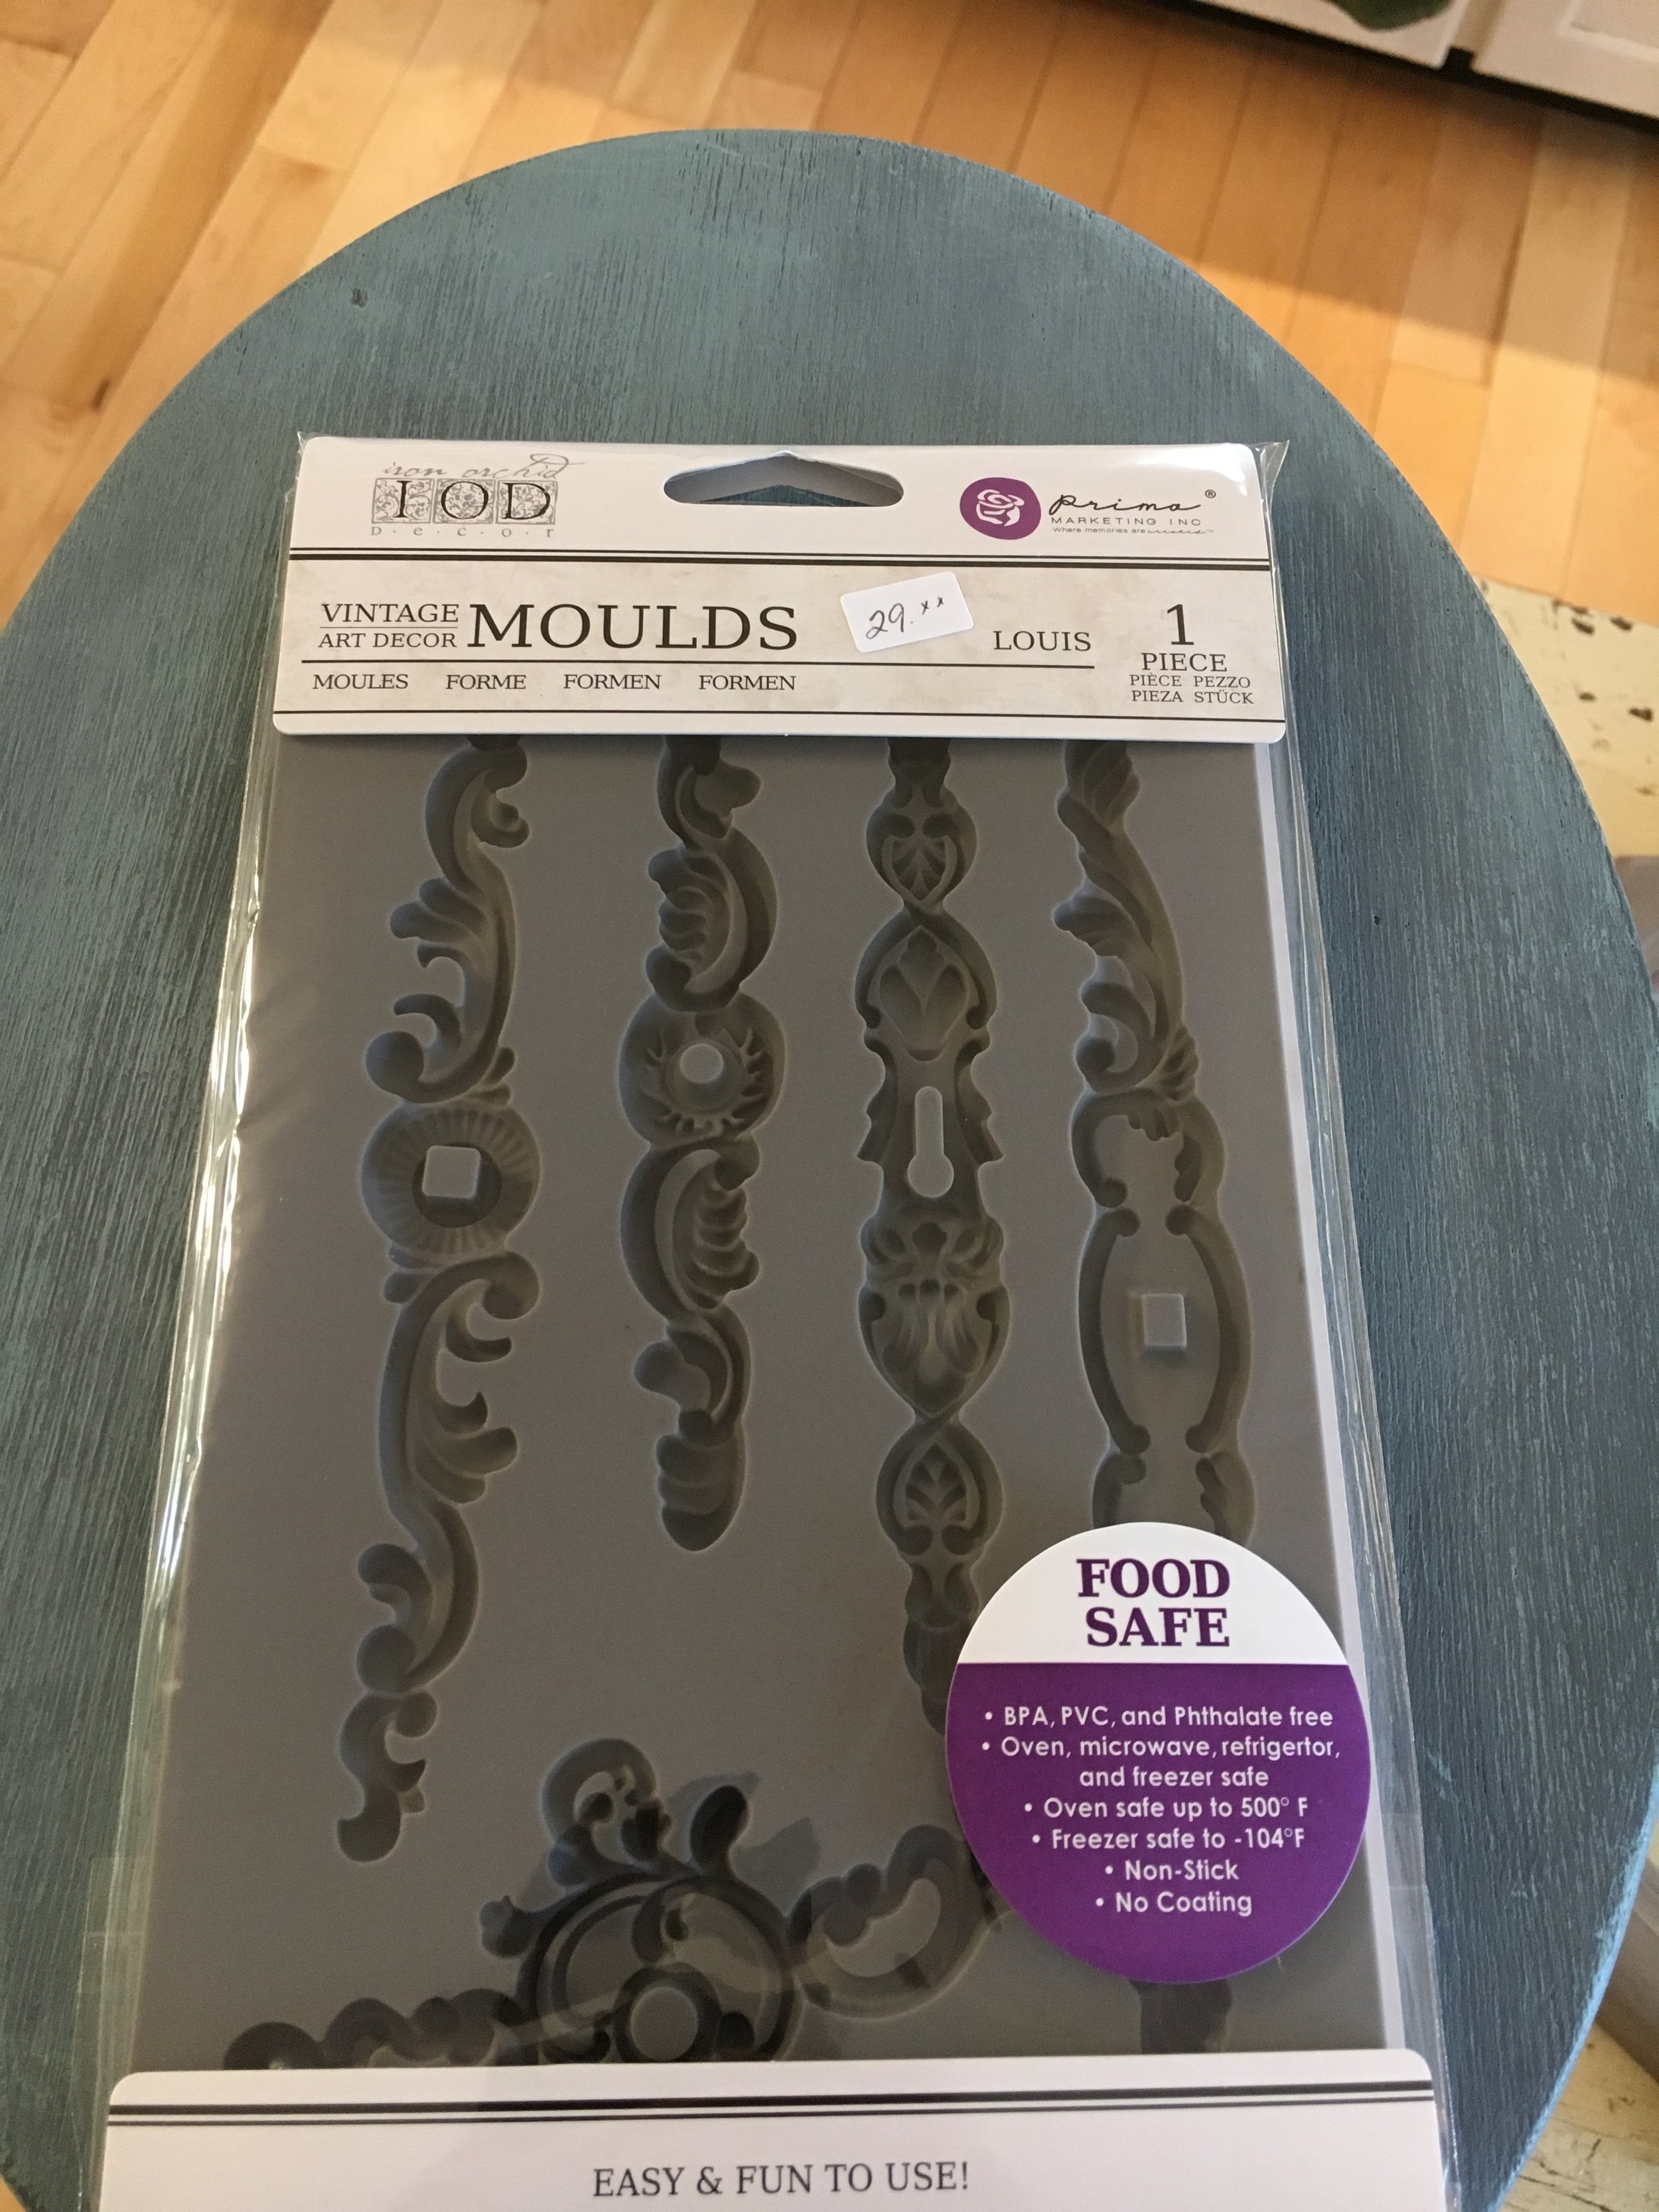 Moulds to add to your refinished pieces